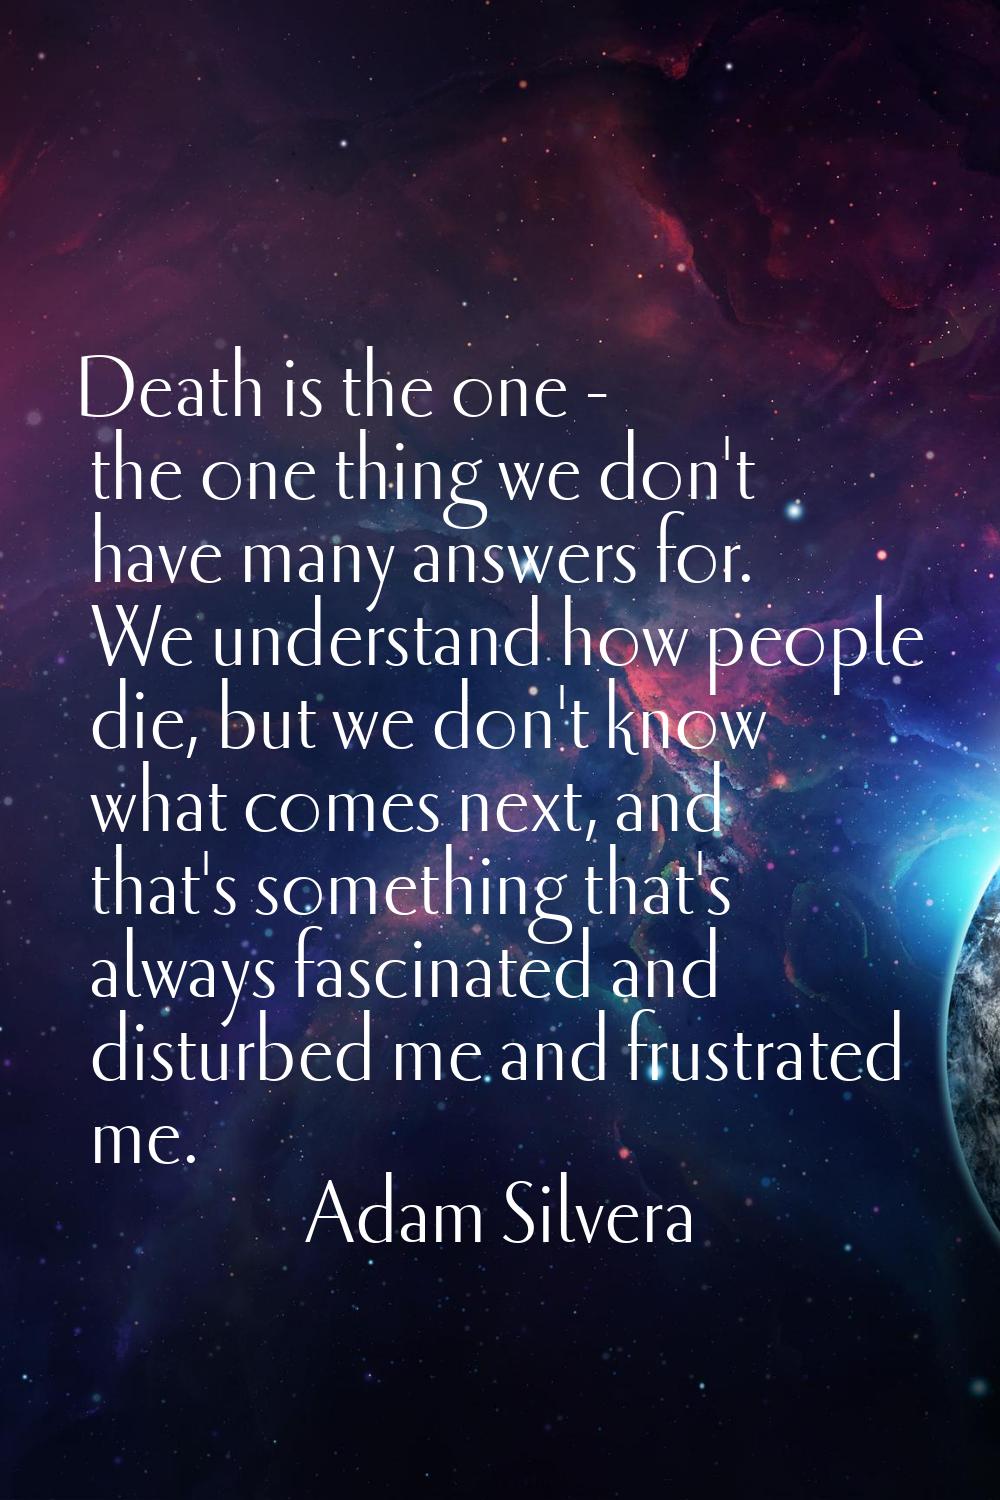 Death is the one - the one thing we don't have many answers for. We understand how people die, but 